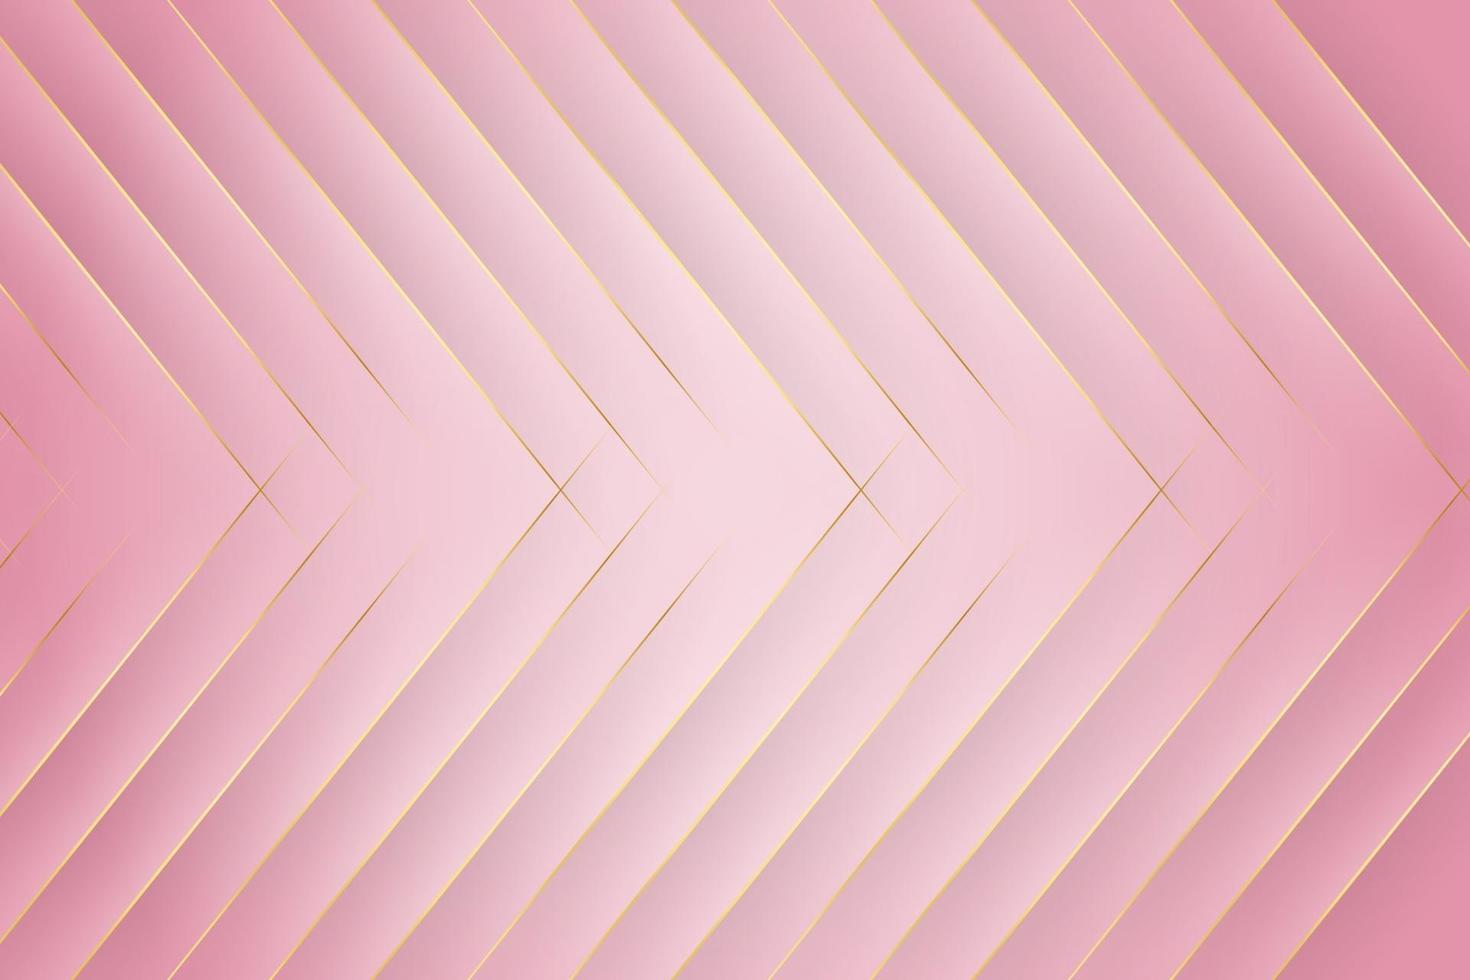 Elegant pink modern background with diagonal gold line and shadow vector